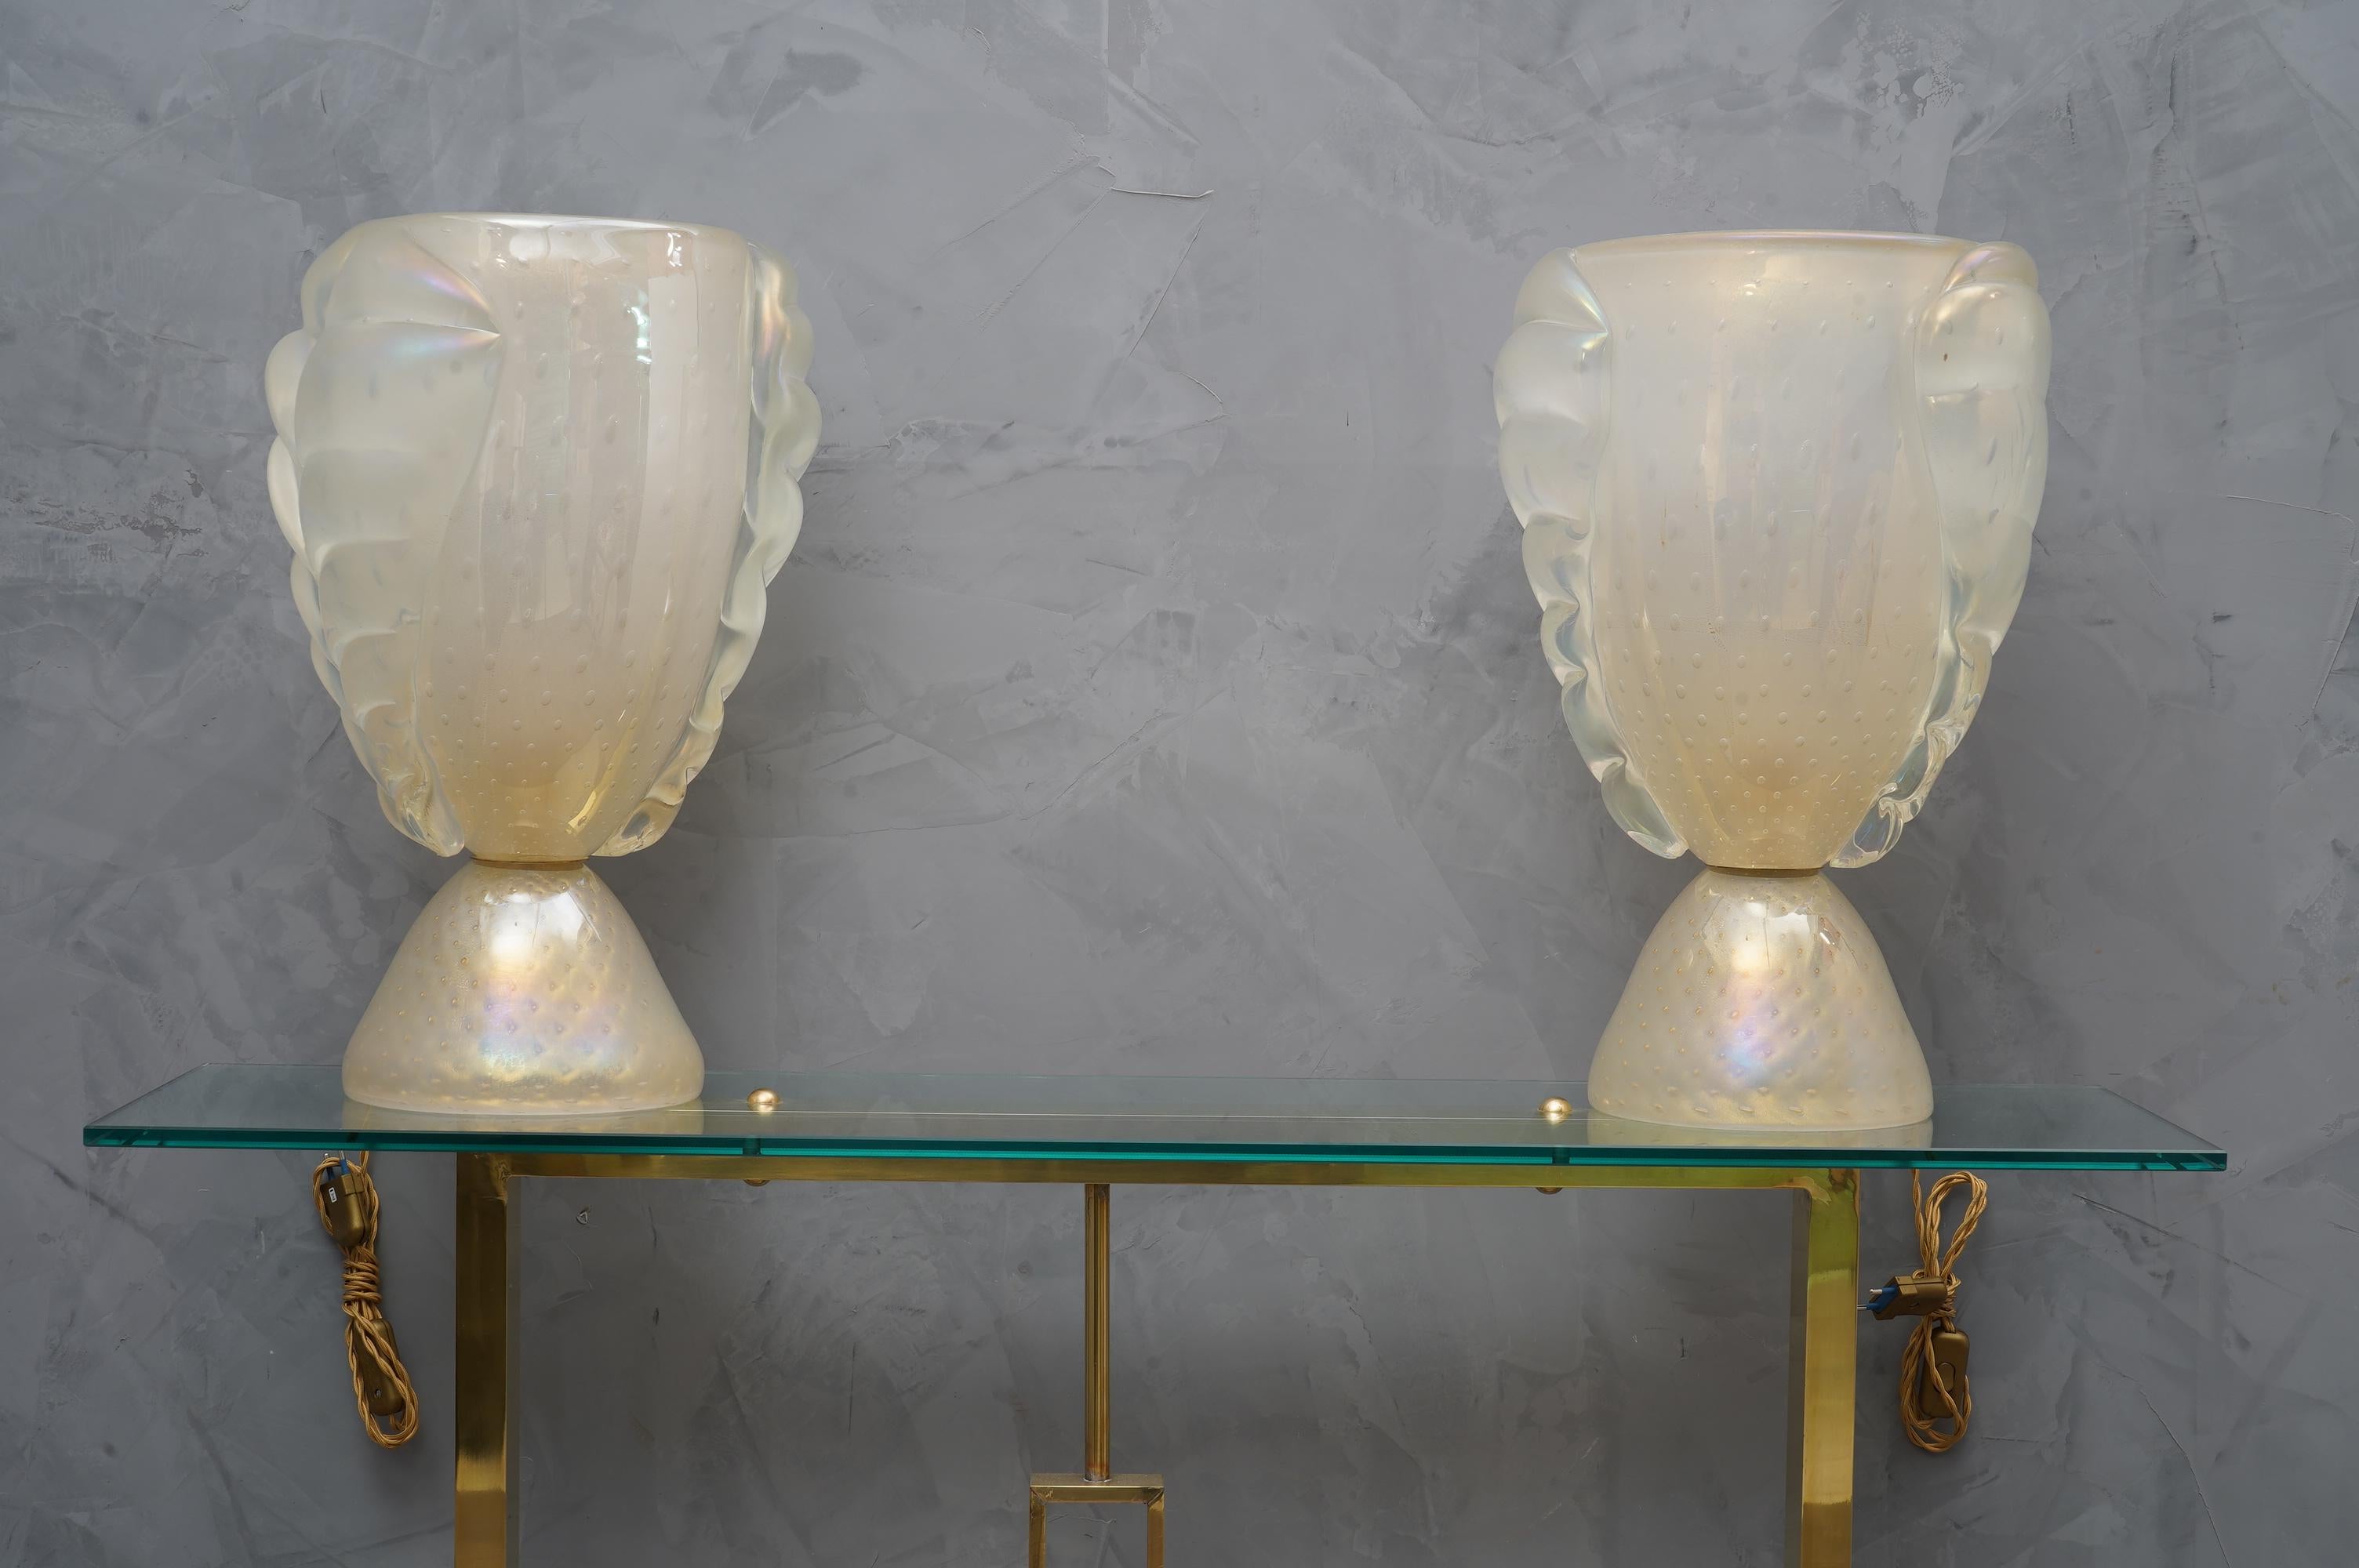 Splendid pair of Murano table lamps punched Barovier & Toso. The Murano furnaces create an indisputable timeless design. A supreme iridescent gold color.

The table lamps are composed of a large upper cup of oval in shape, on which a pair of large